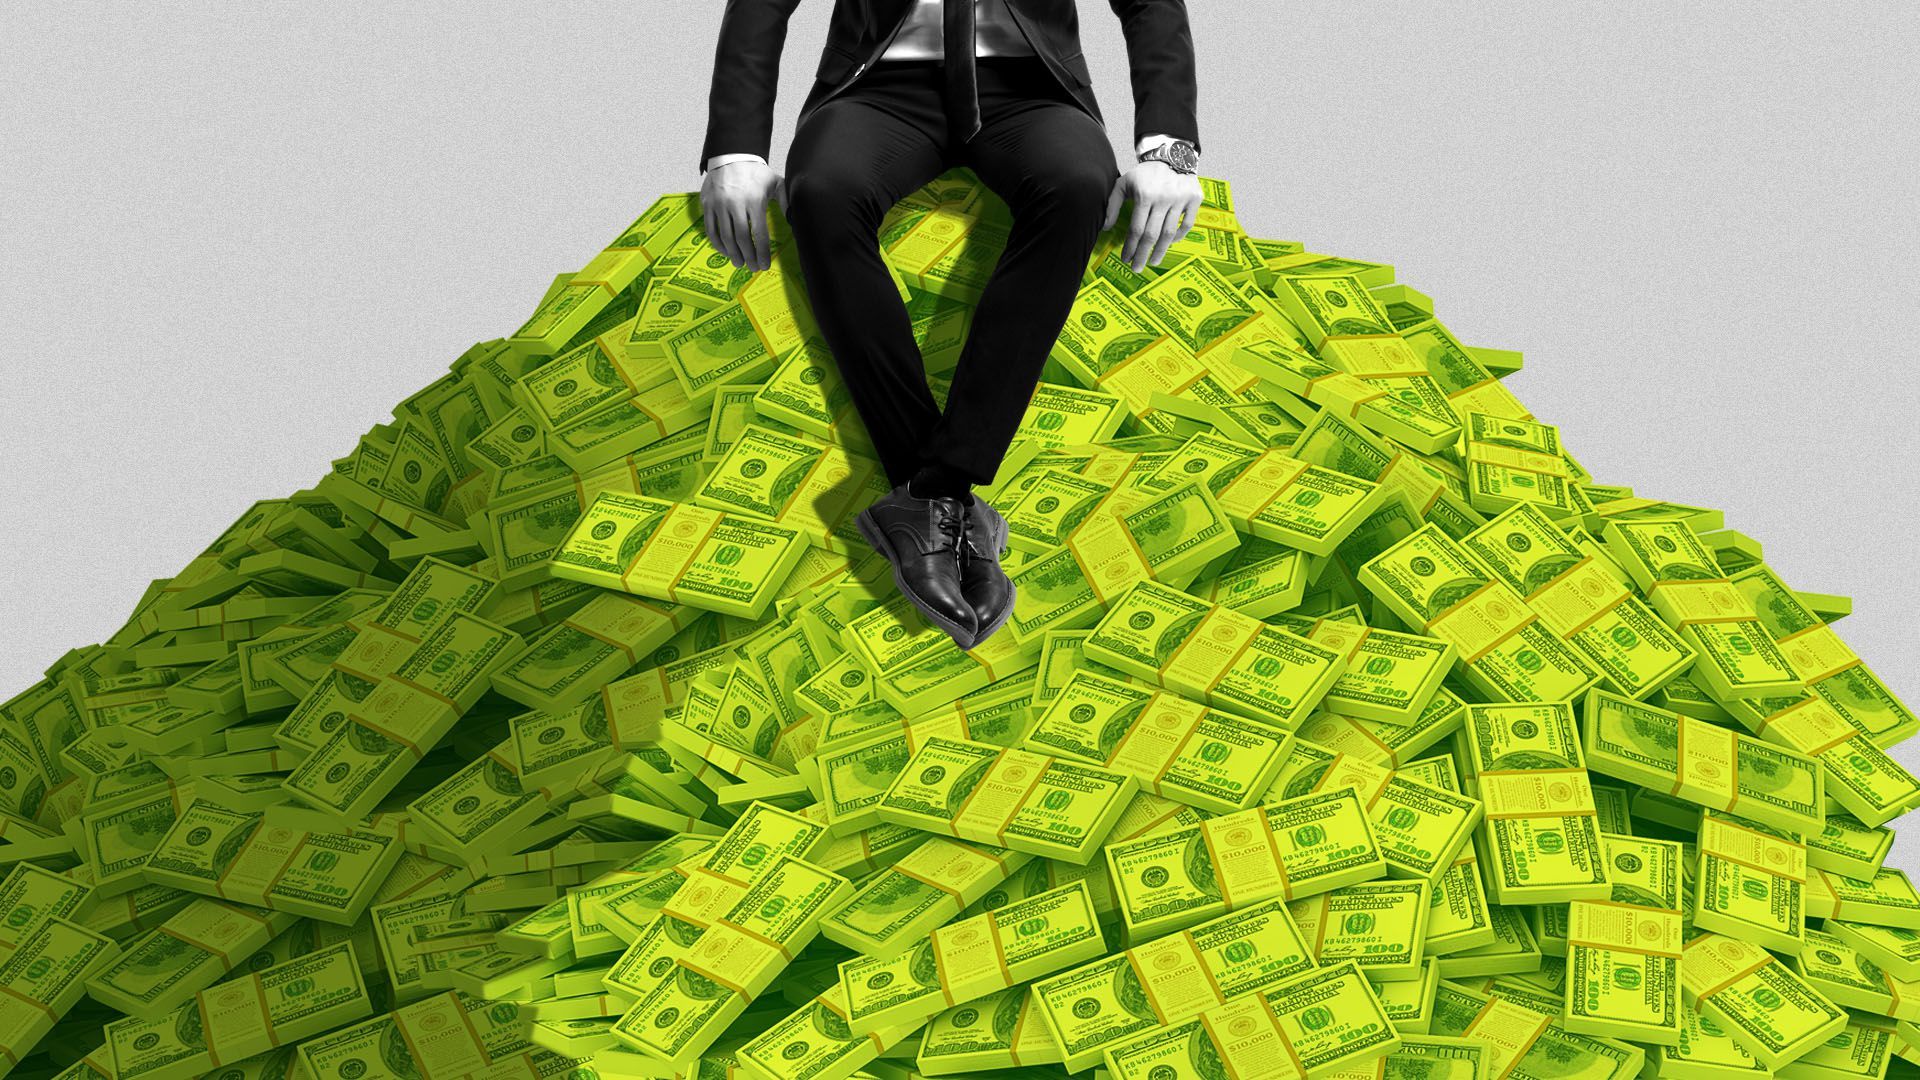 Illustration of a man in a suit sitting on top of a pile of money